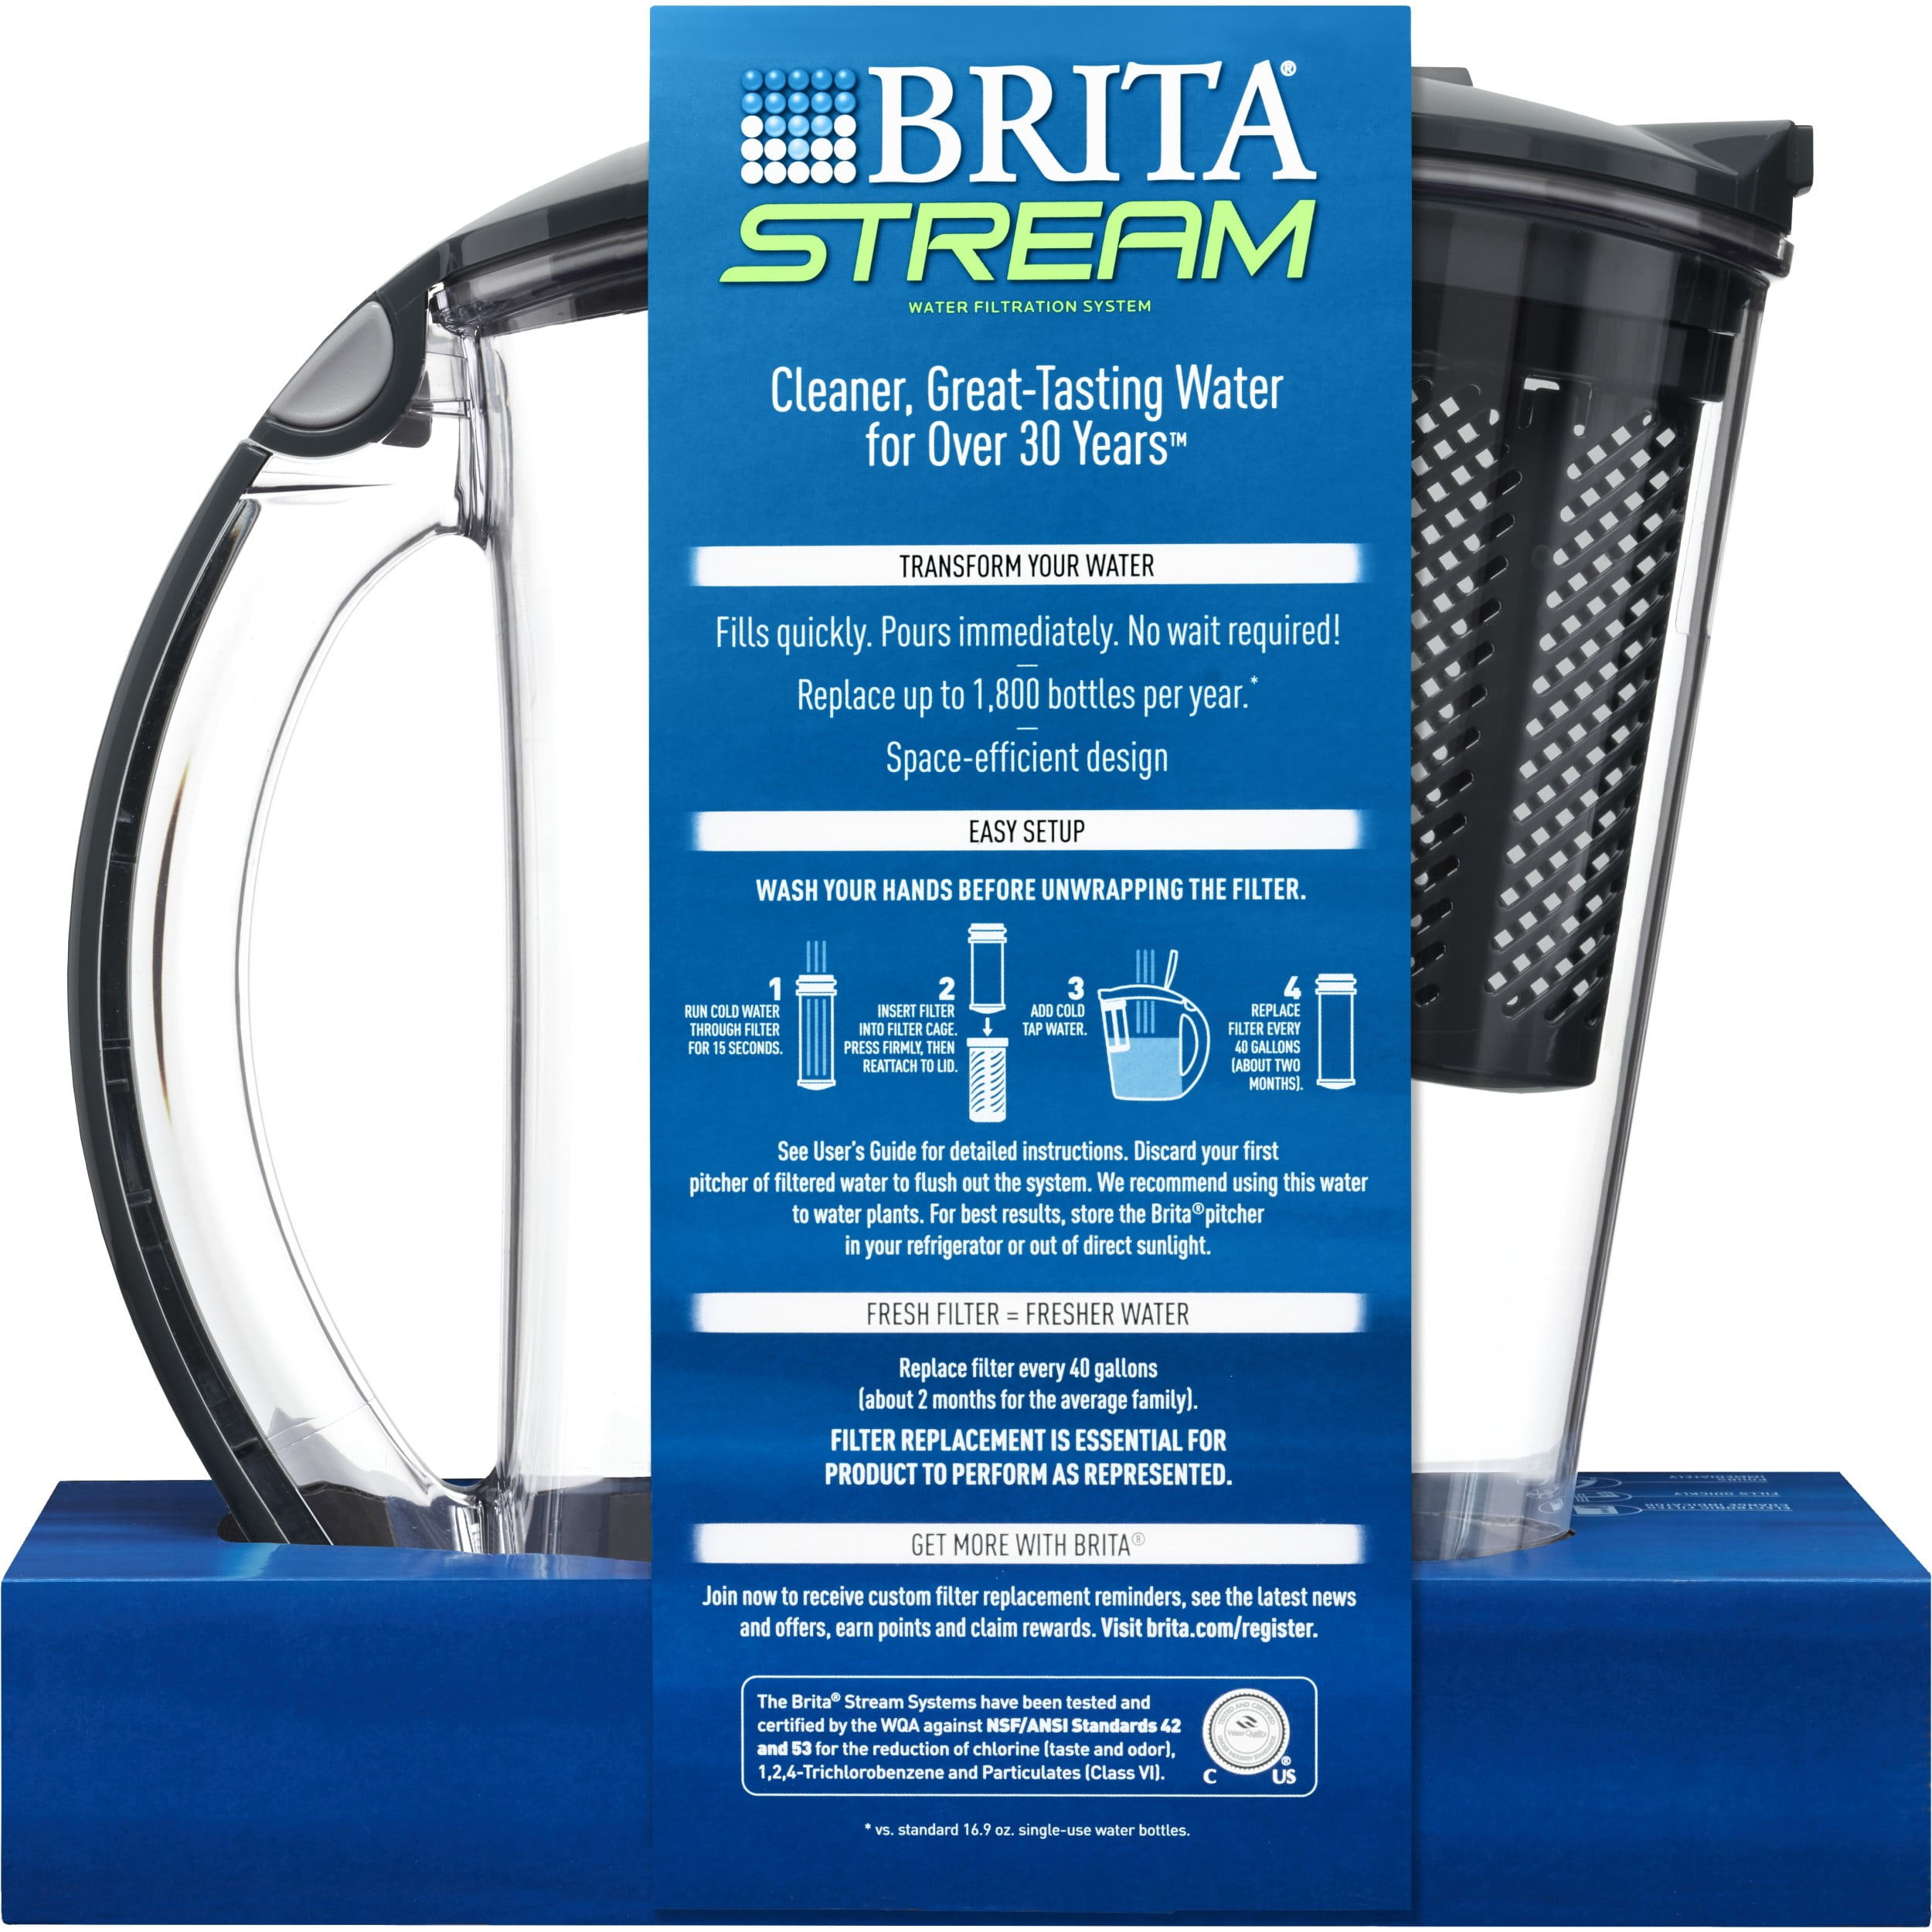 Are All Brita Filters the Same? The Answer Might Surprise You